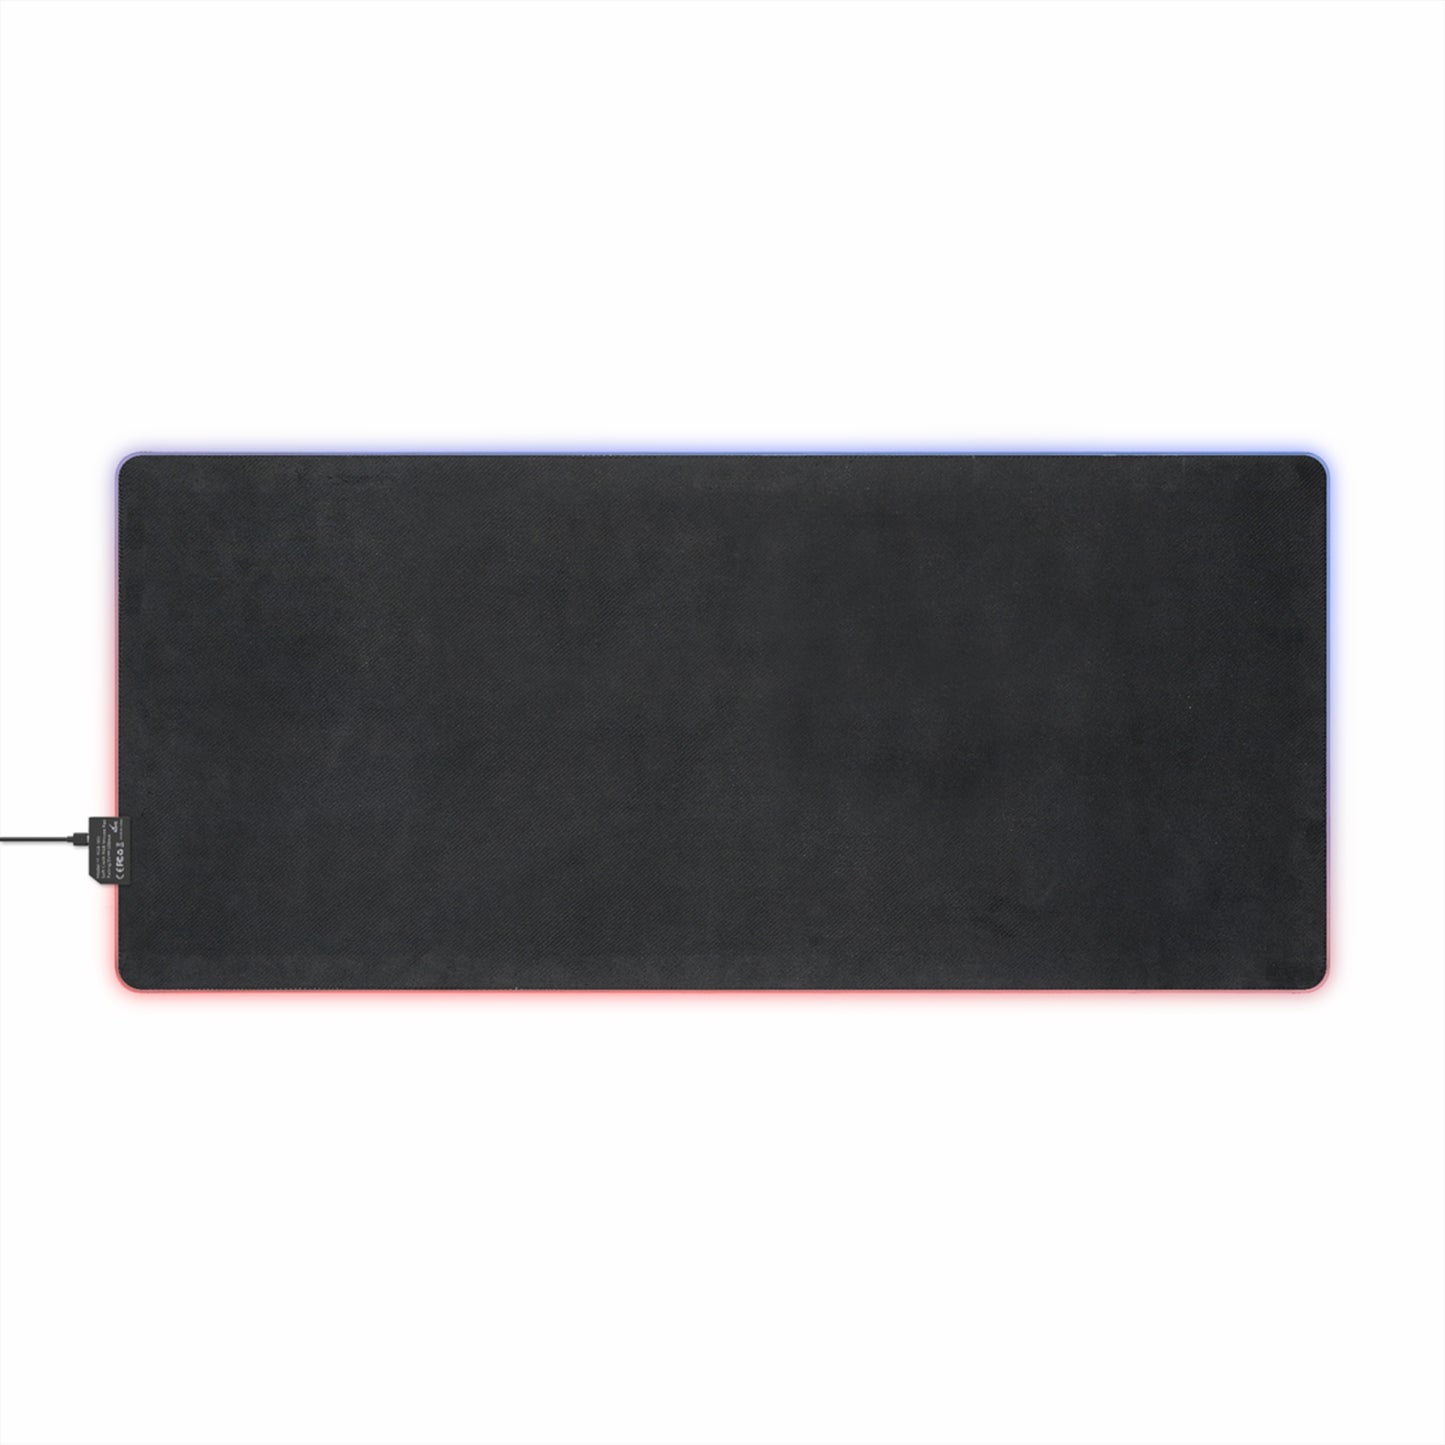 LCAM-28 LED Gaming Mouse Pad